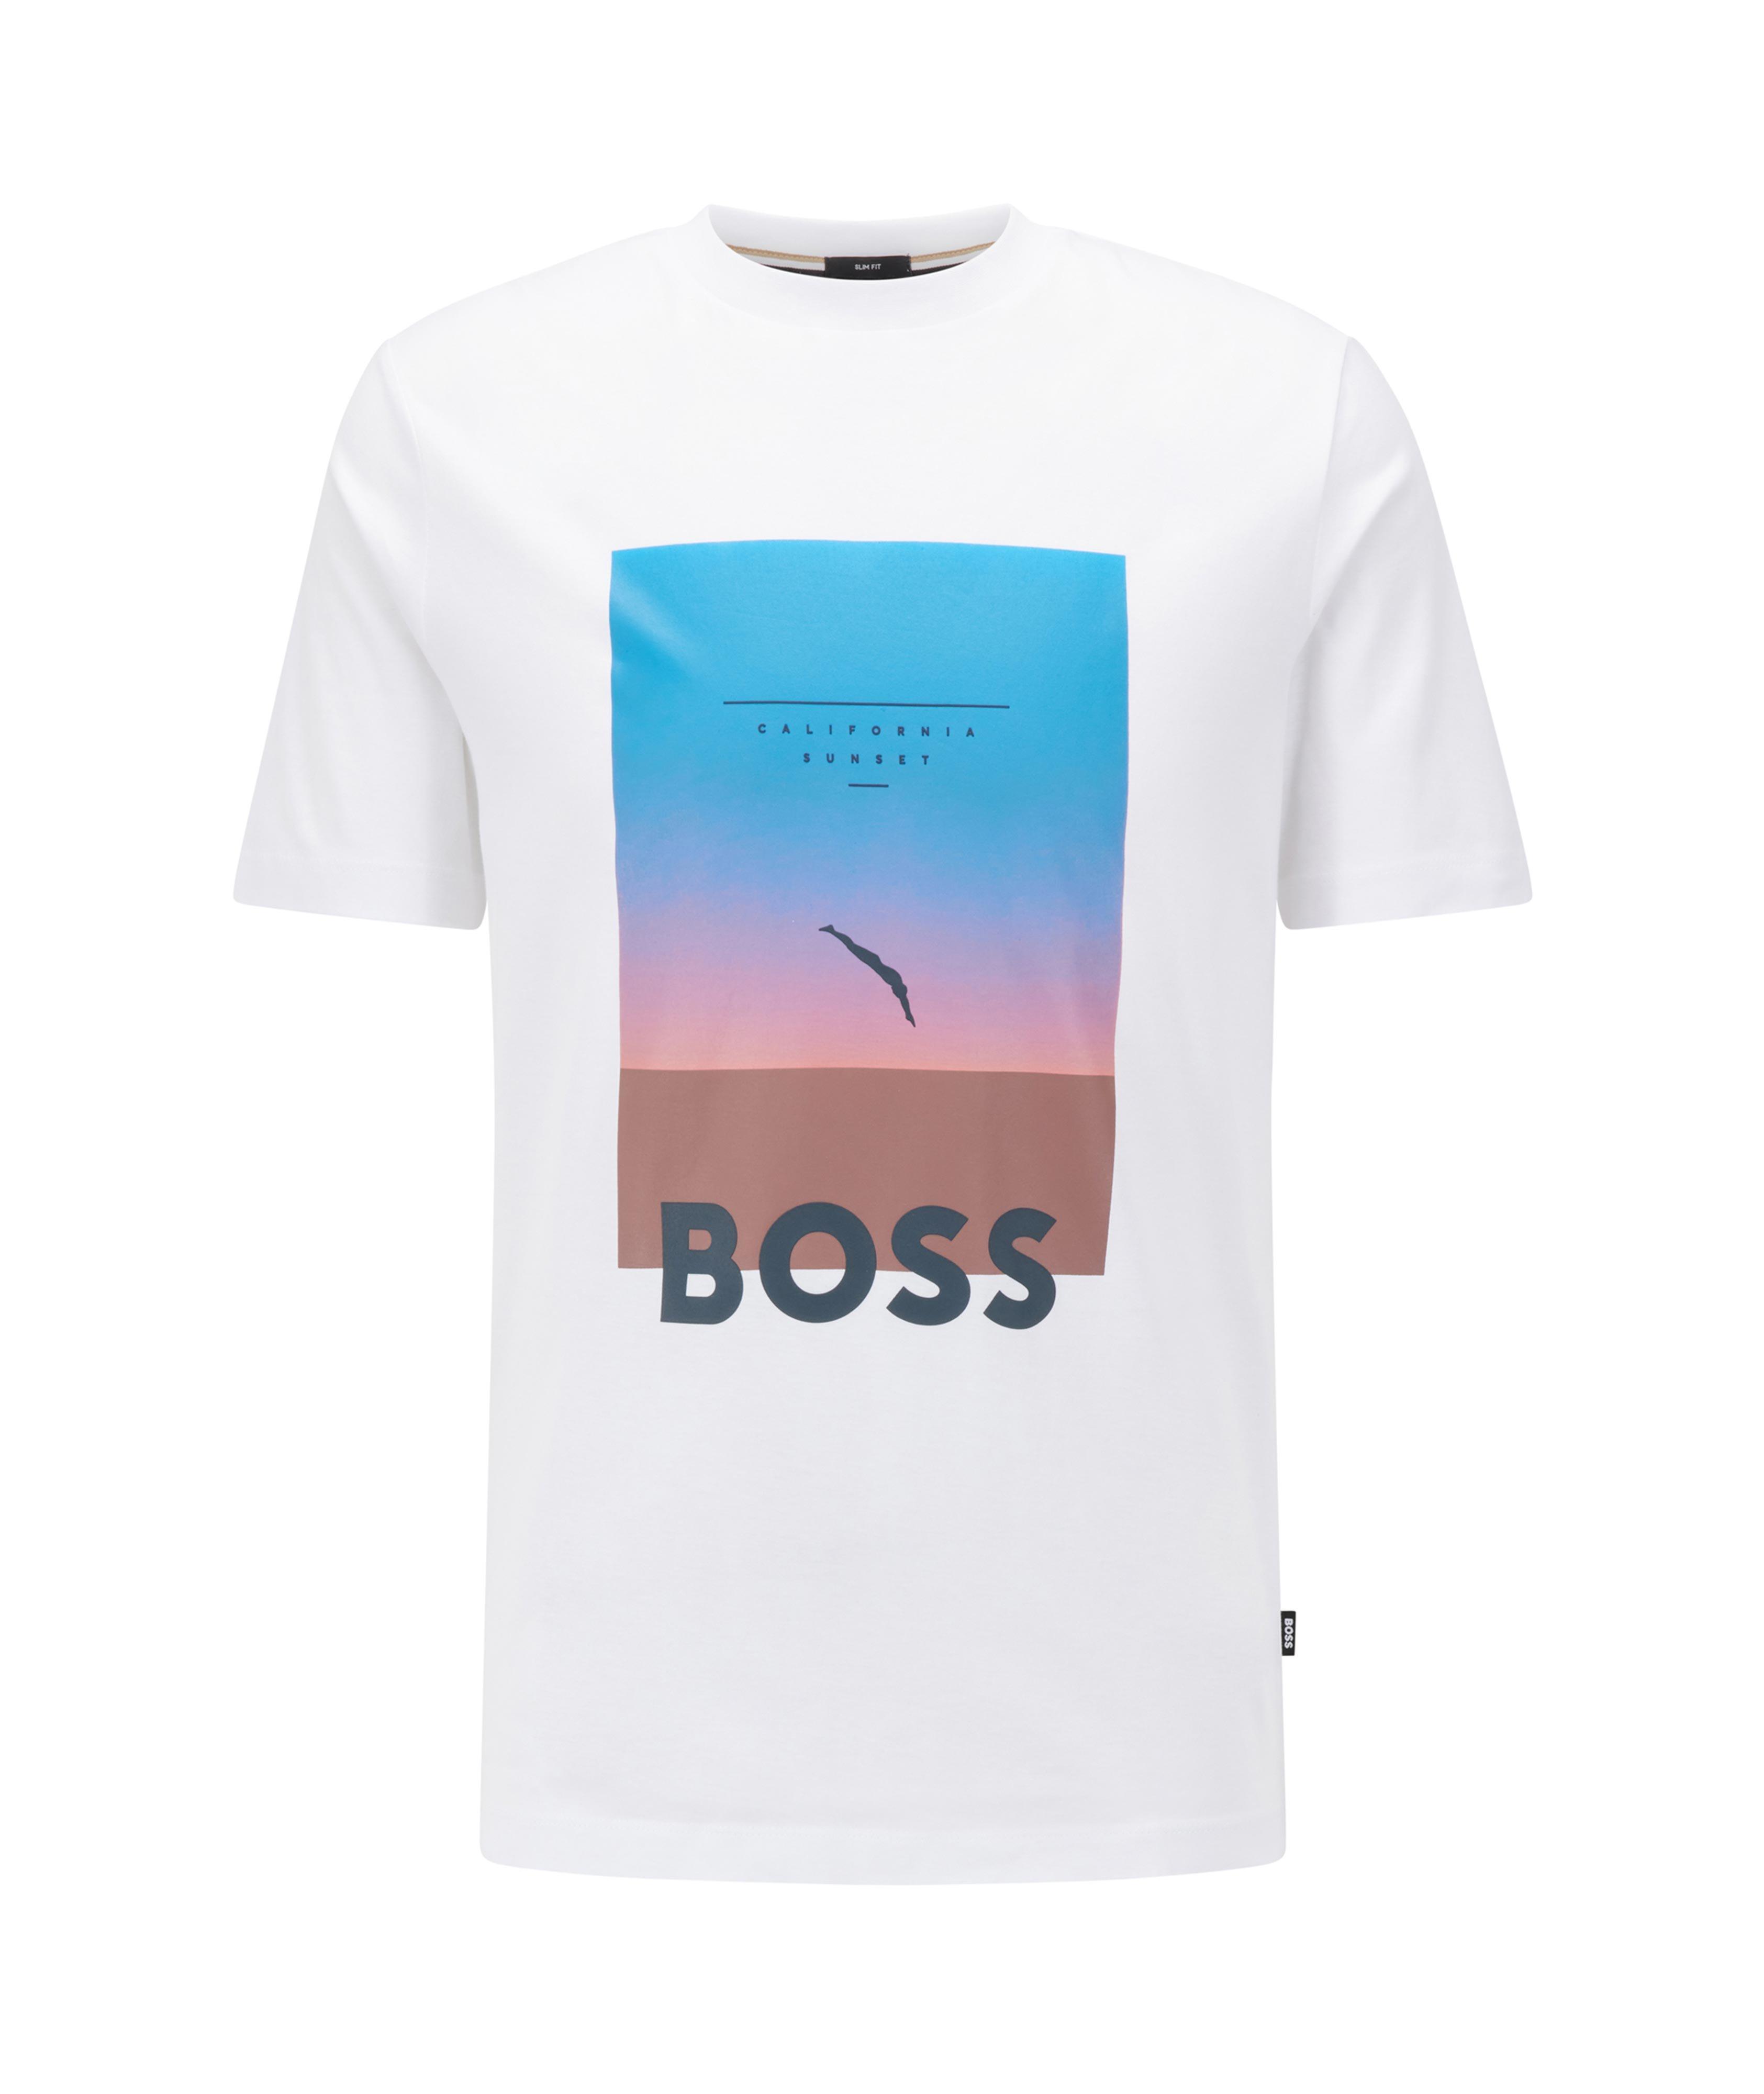 Slim-Fit T-Shirt With Photographic Artwork  image 0